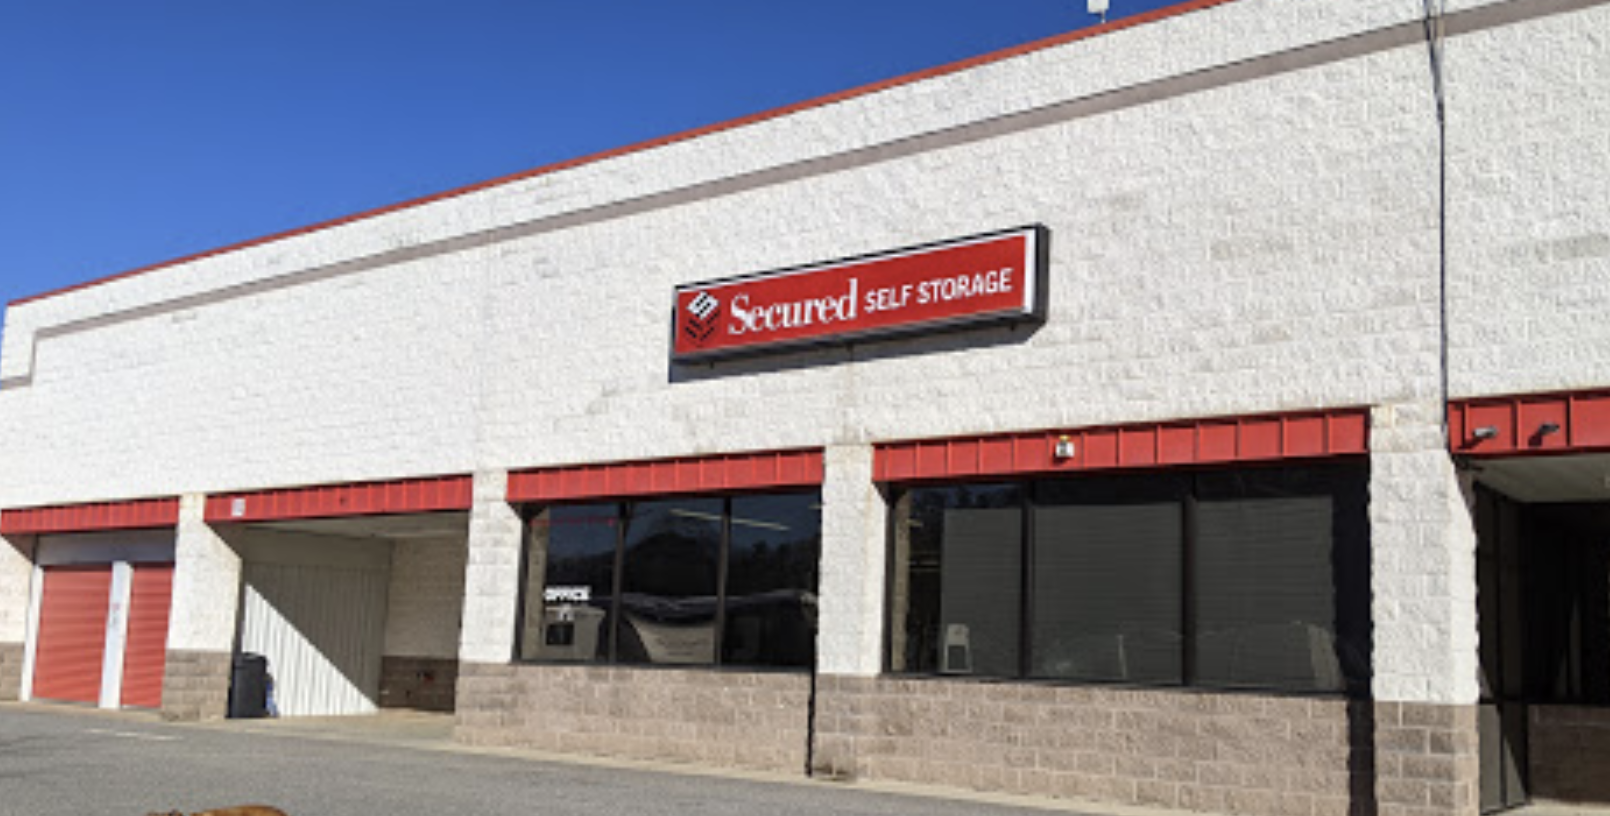 Secured Self Storage in Asheville, NC